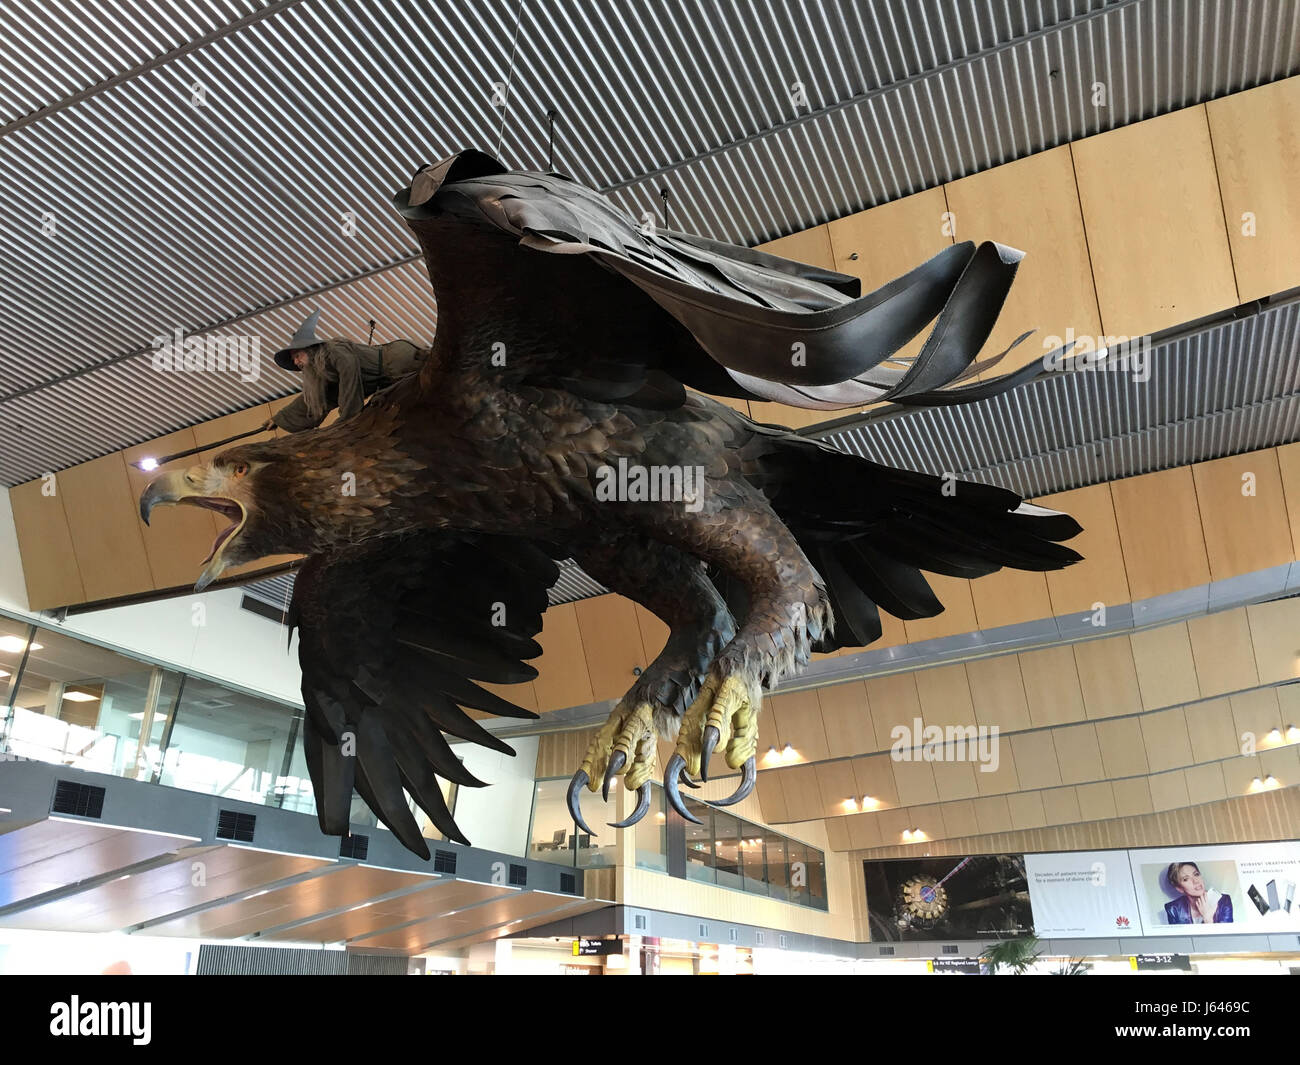 Gandalf and its geant eagle in the Wellington airport for the promotion of the film of Peter Jackson, The Lord of the Rings, New Zealand Stock Photo